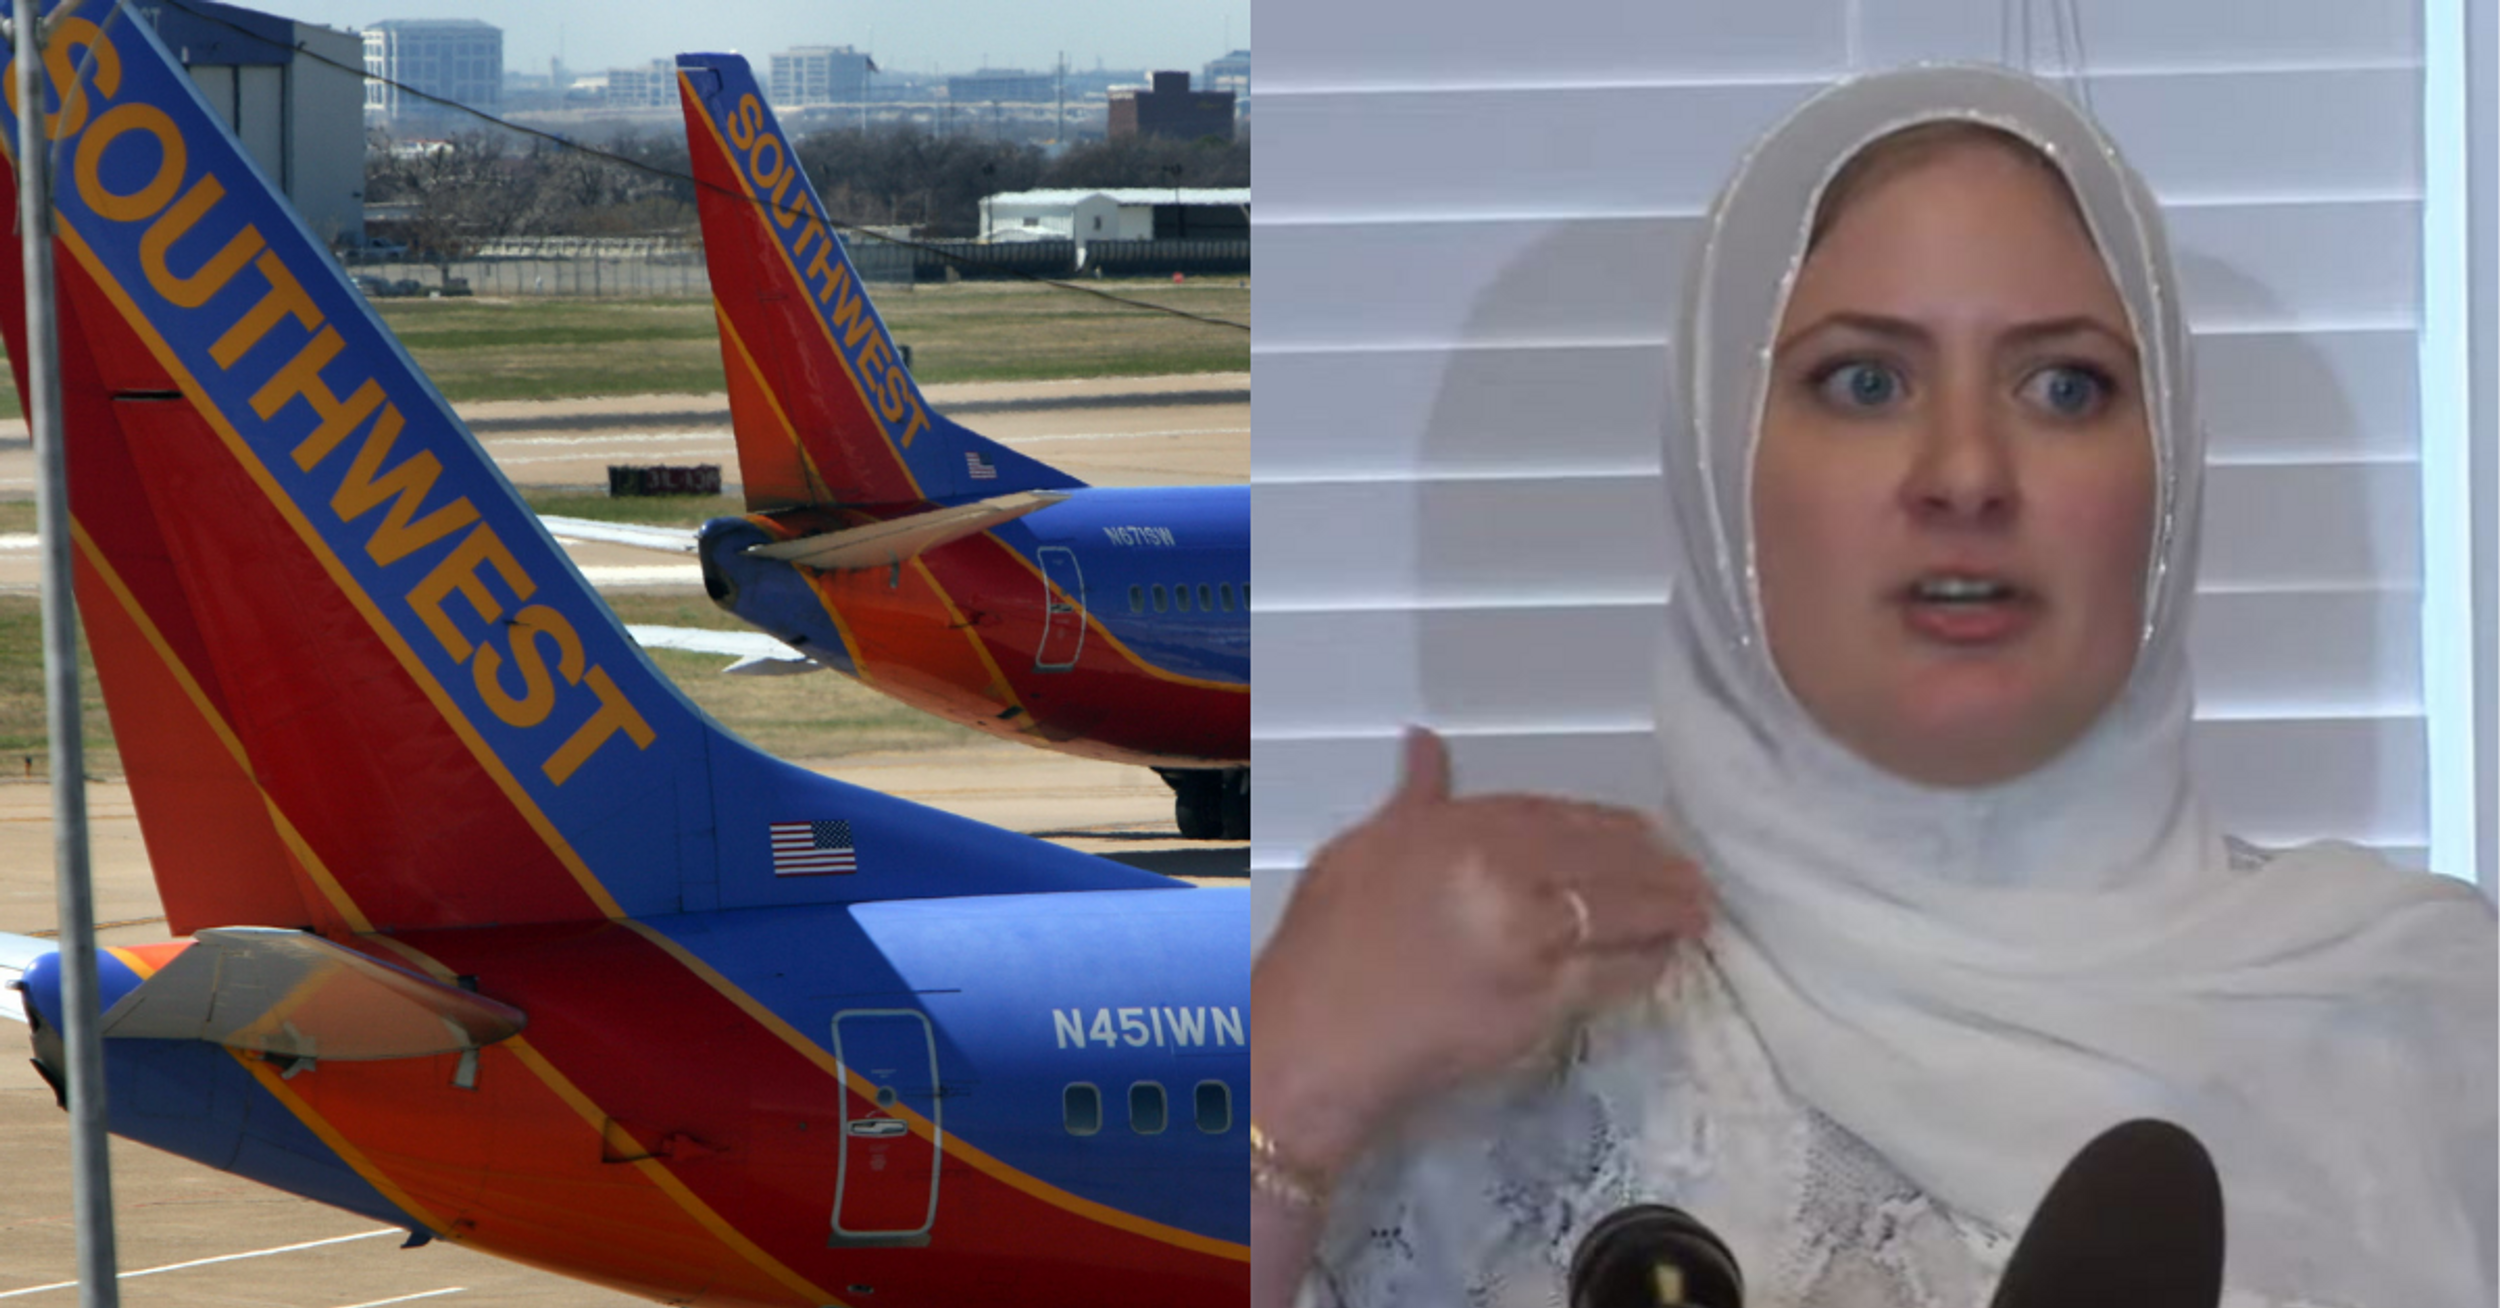 Muslim Woman Files Complaint Against Southwest Airlines After Being Barred From Exit Row Over Hijab